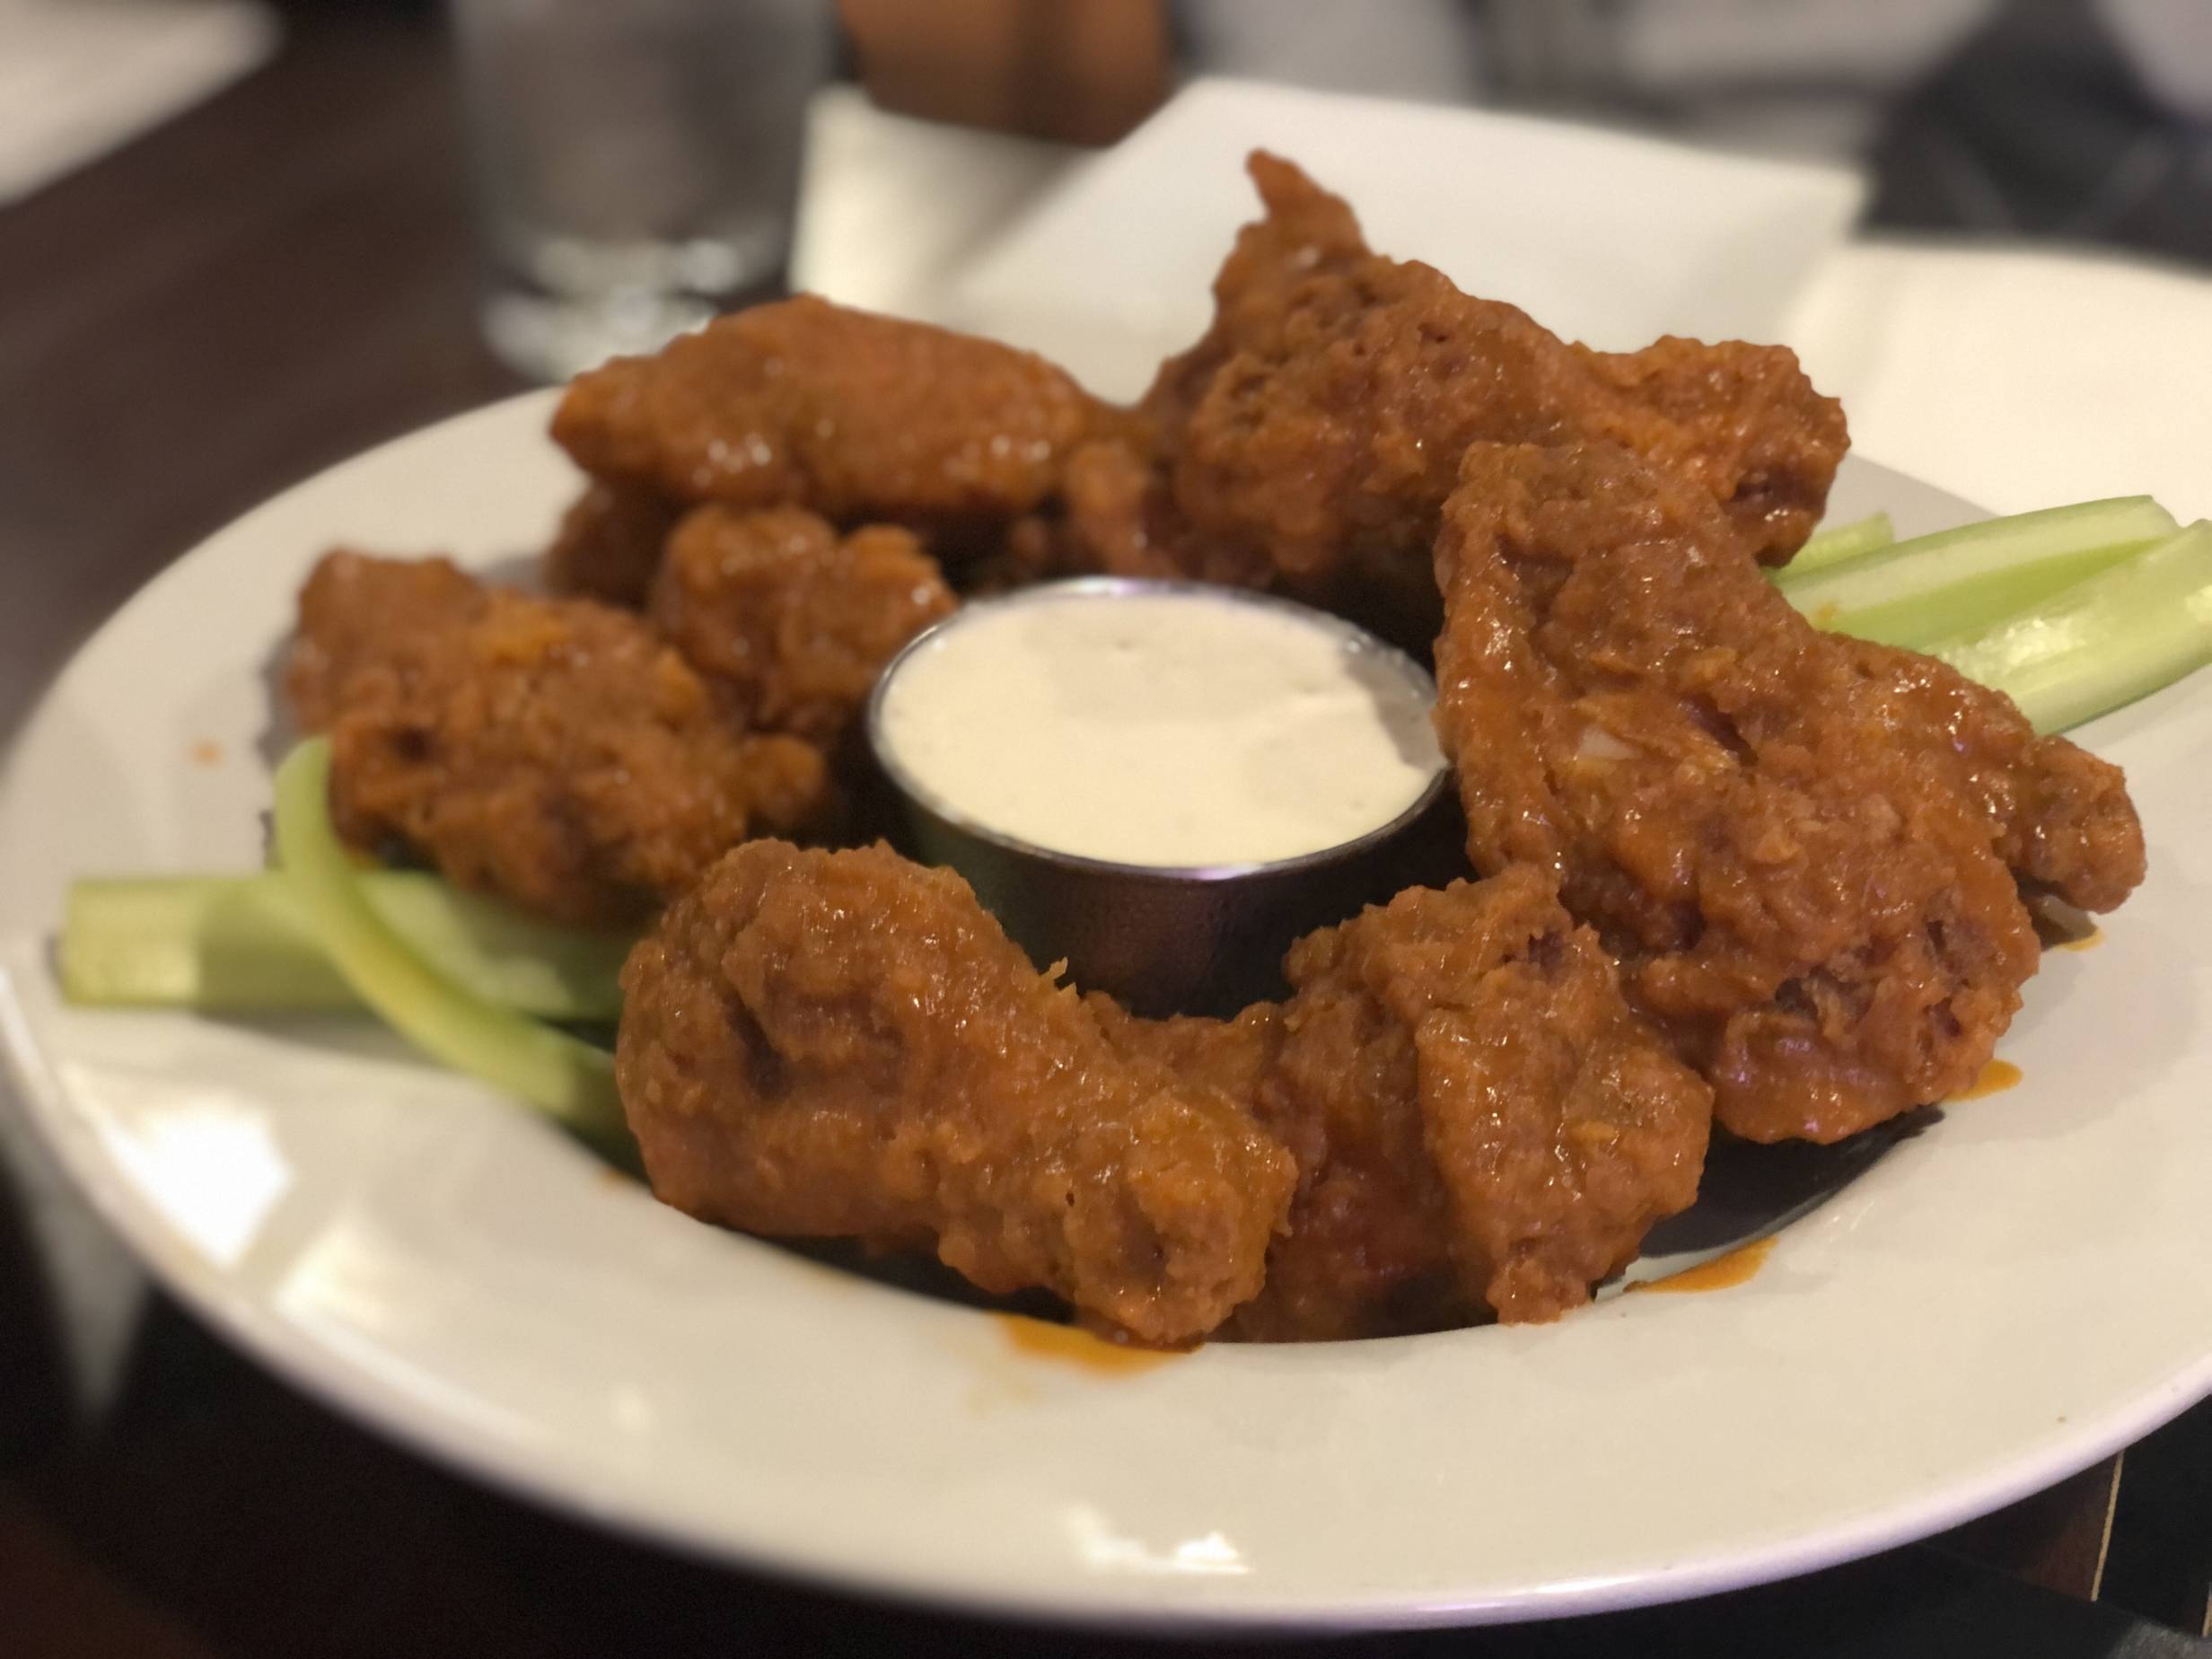 Twelve bone-in fried chicken wings are covered in an orange buffalo sauce on a white plate with thin celery slices and a cup of ranch dressing in the center. Photo by Alyssa Buckley.